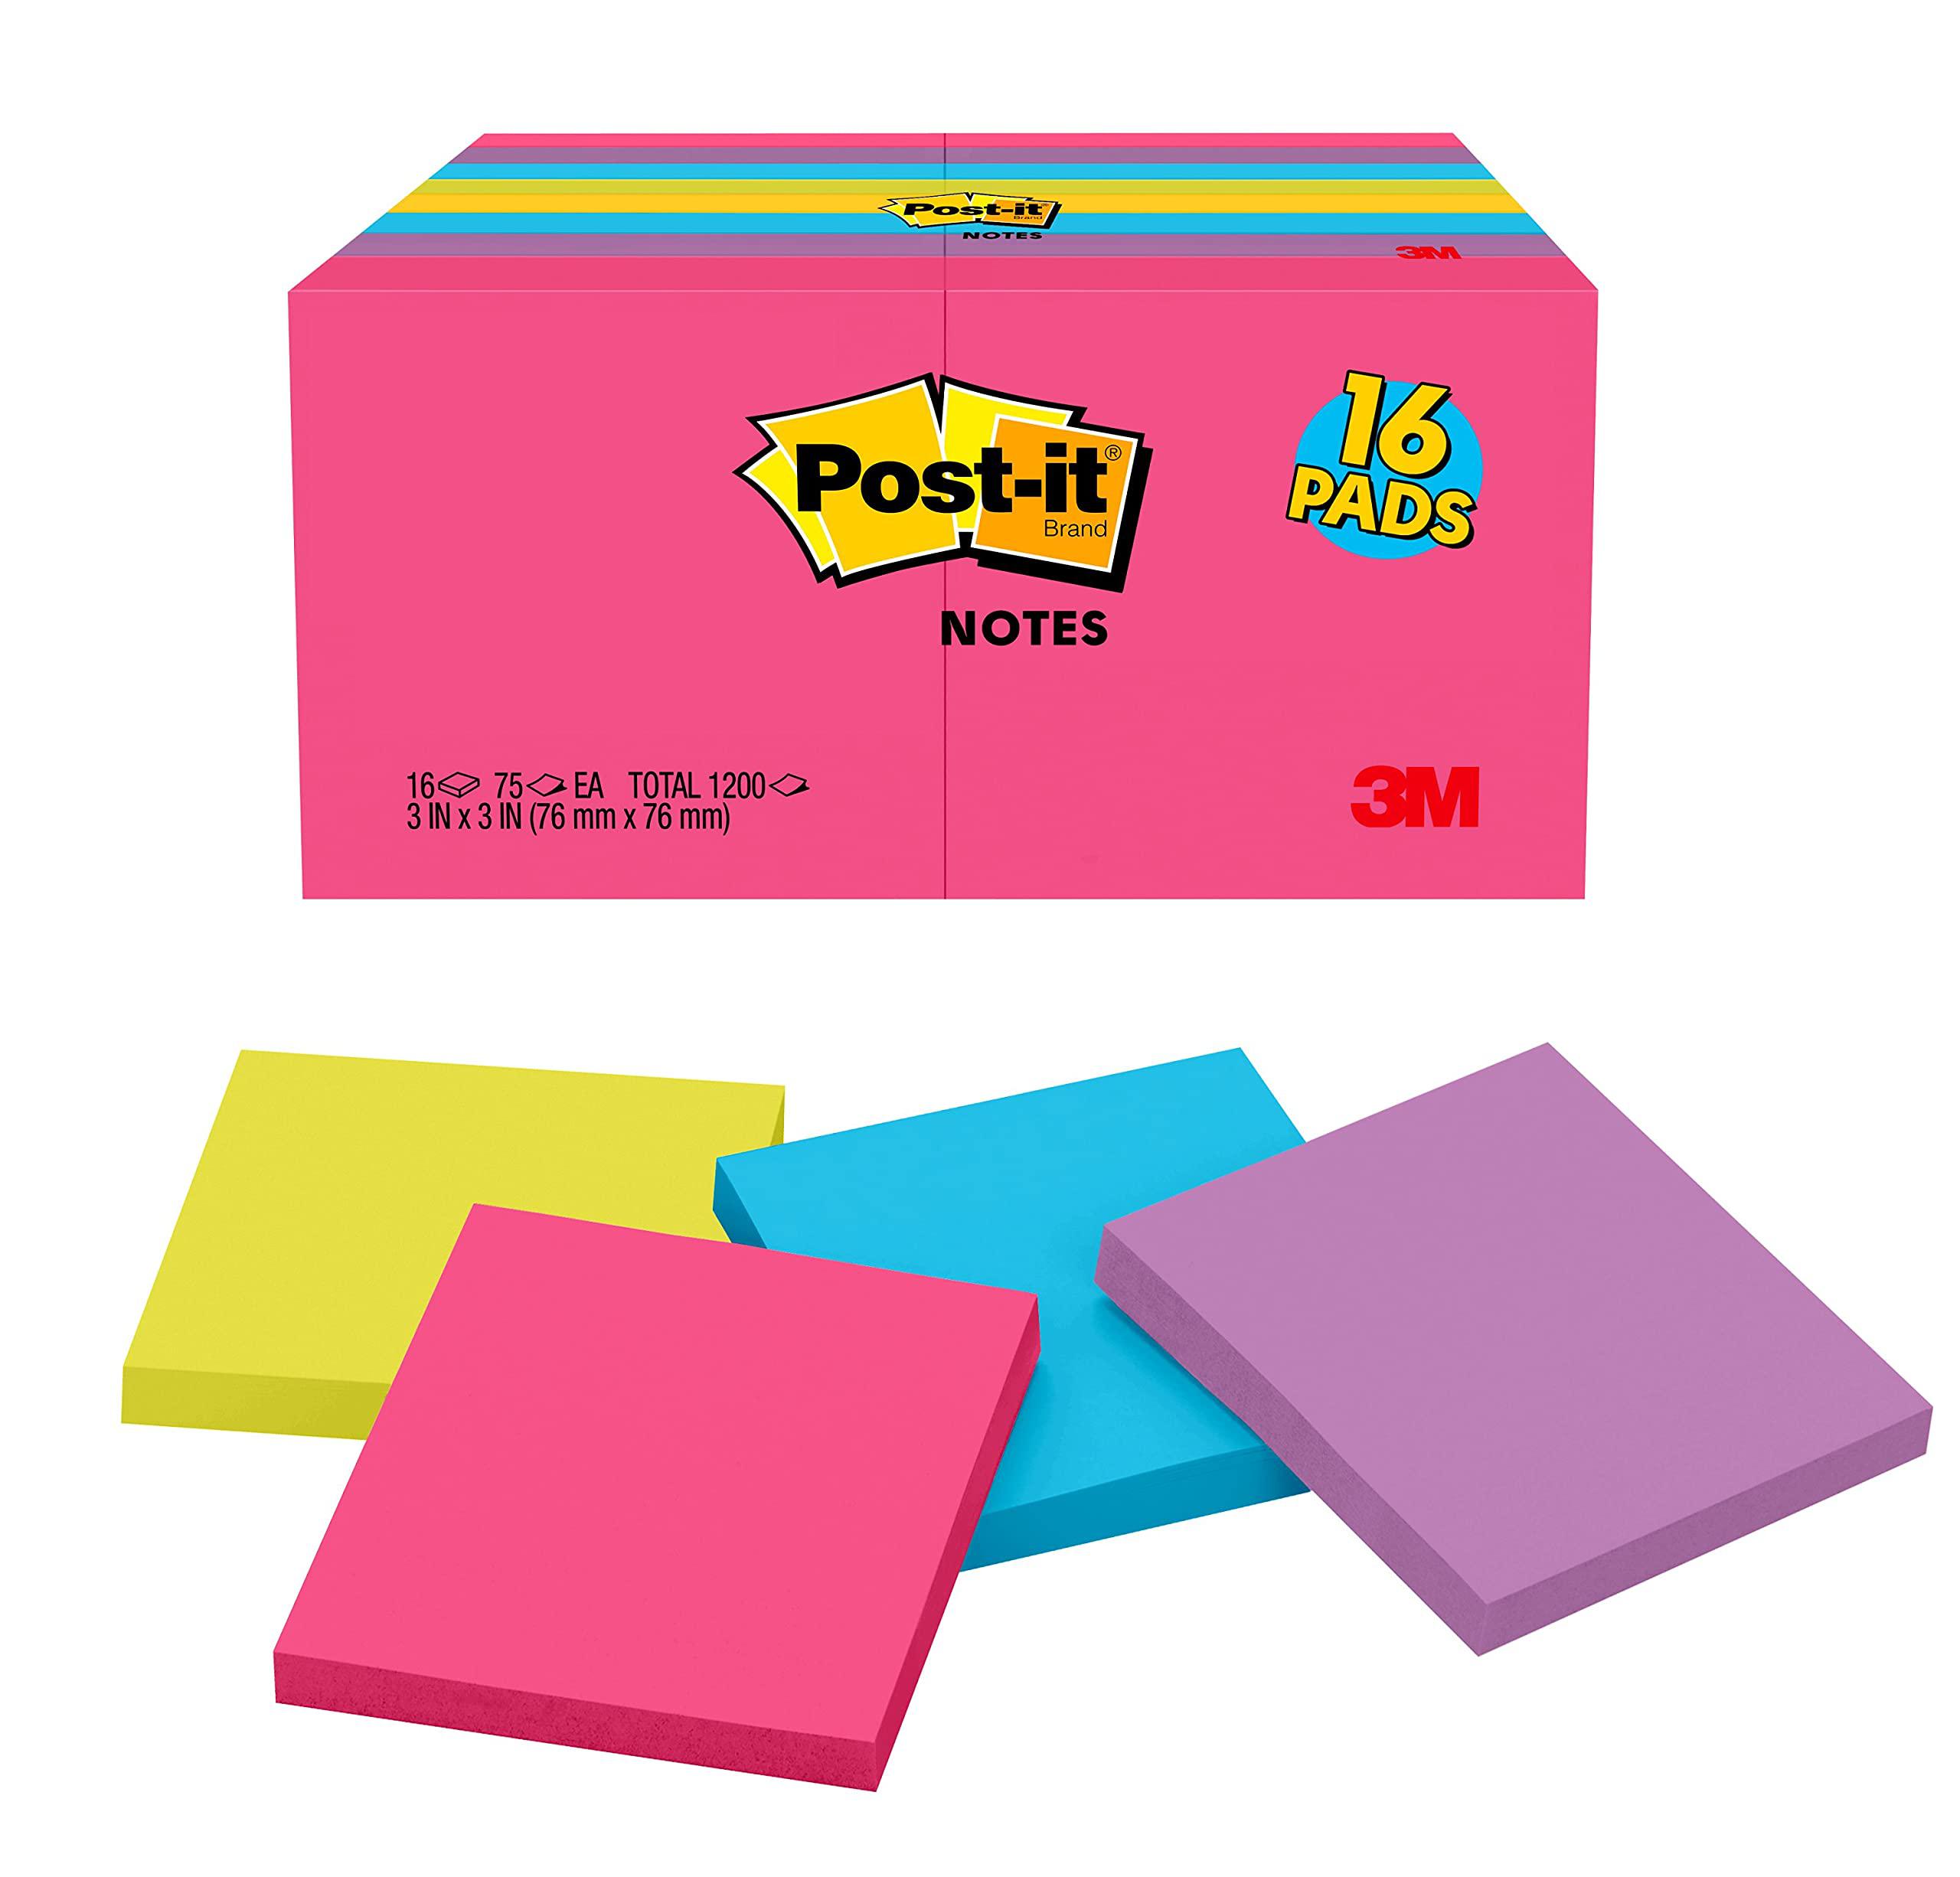 post-it notes, 3x3 in. bulk 16 pads/pack, 75 sheets per pad, assorted bright colors sticky notes including hot pink purple bl